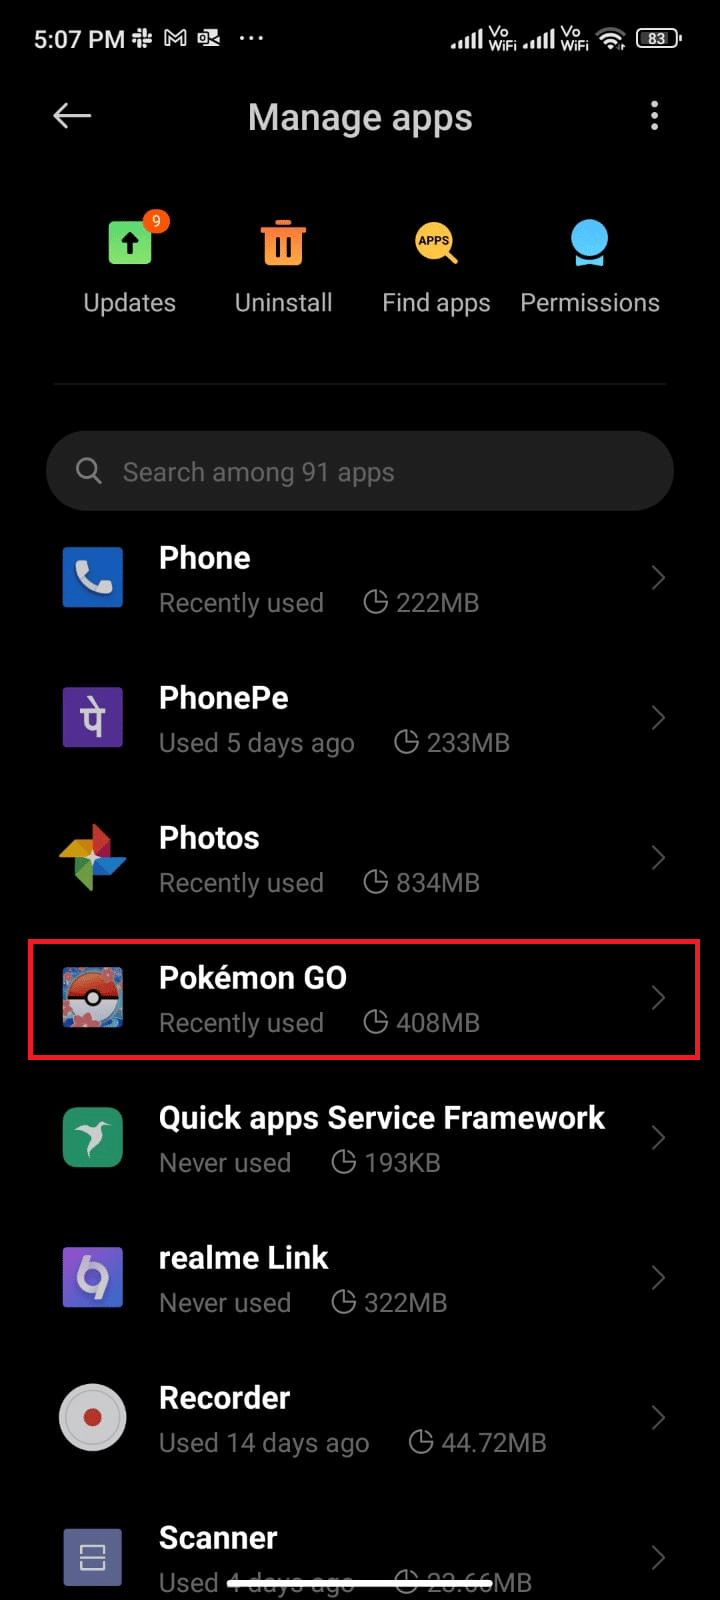 Then, tap on Manage apps and then tap Pokémon GO